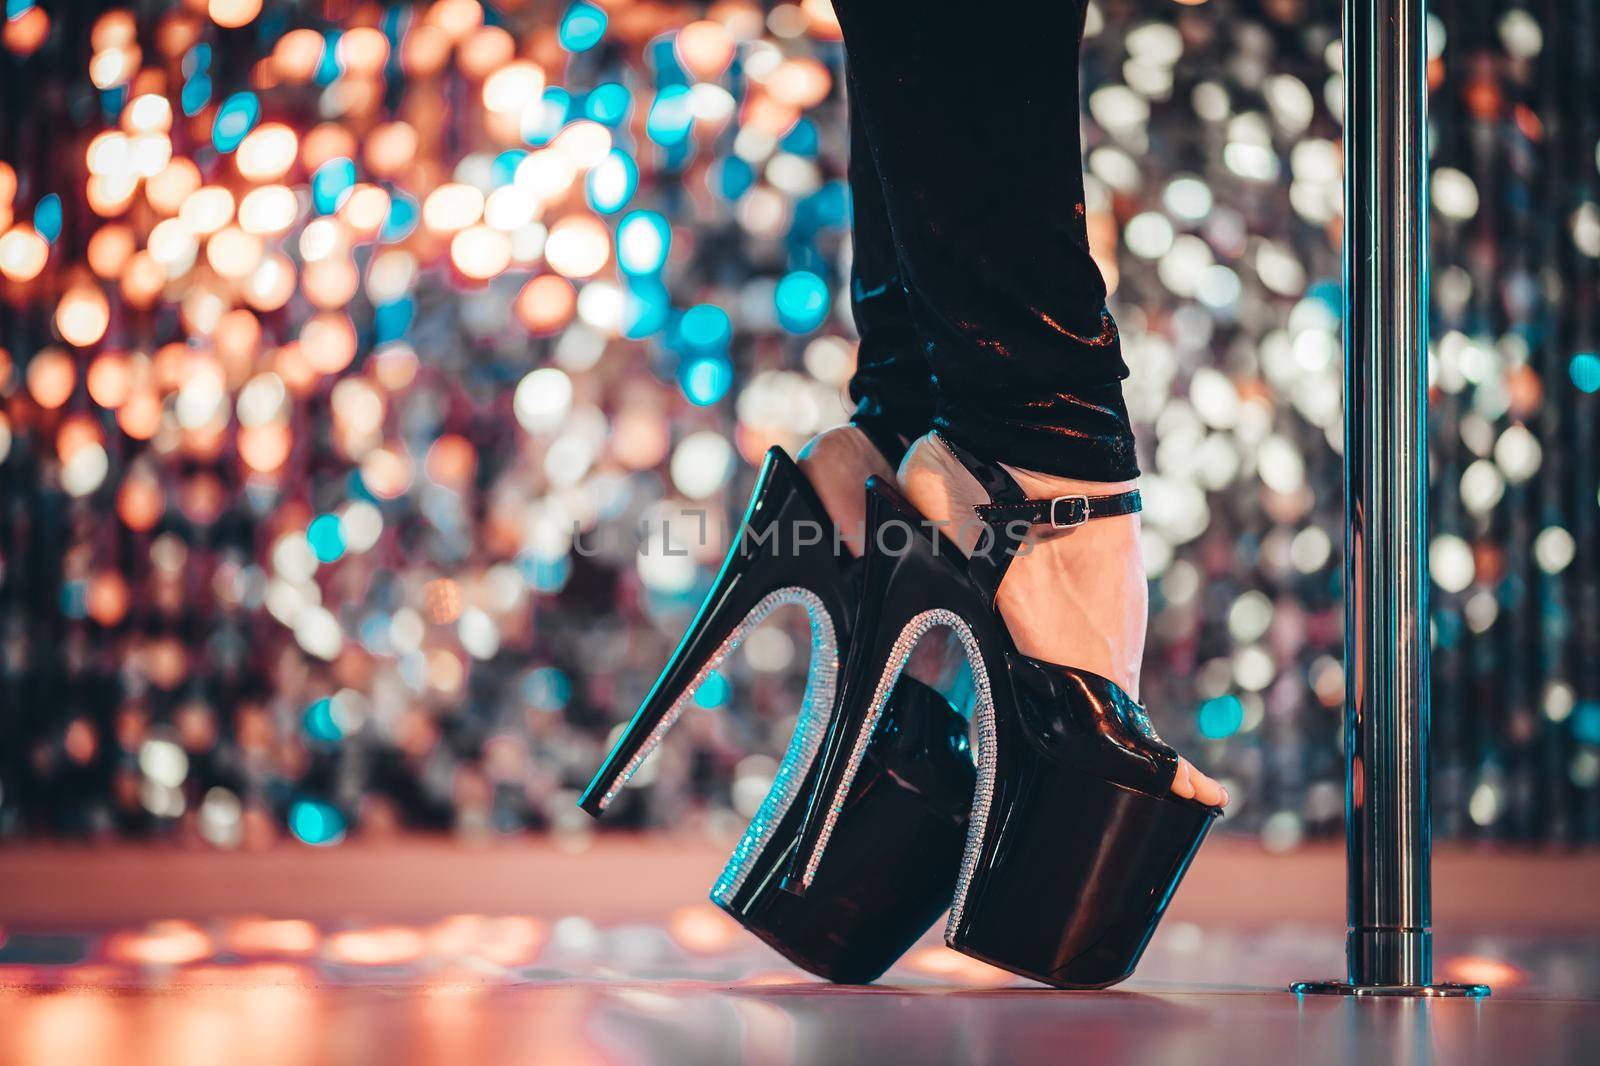 Legs in high sexy shoes near pylone. Striptease dancer moving on stage in strip night club. Pole dancing background. High quality photo